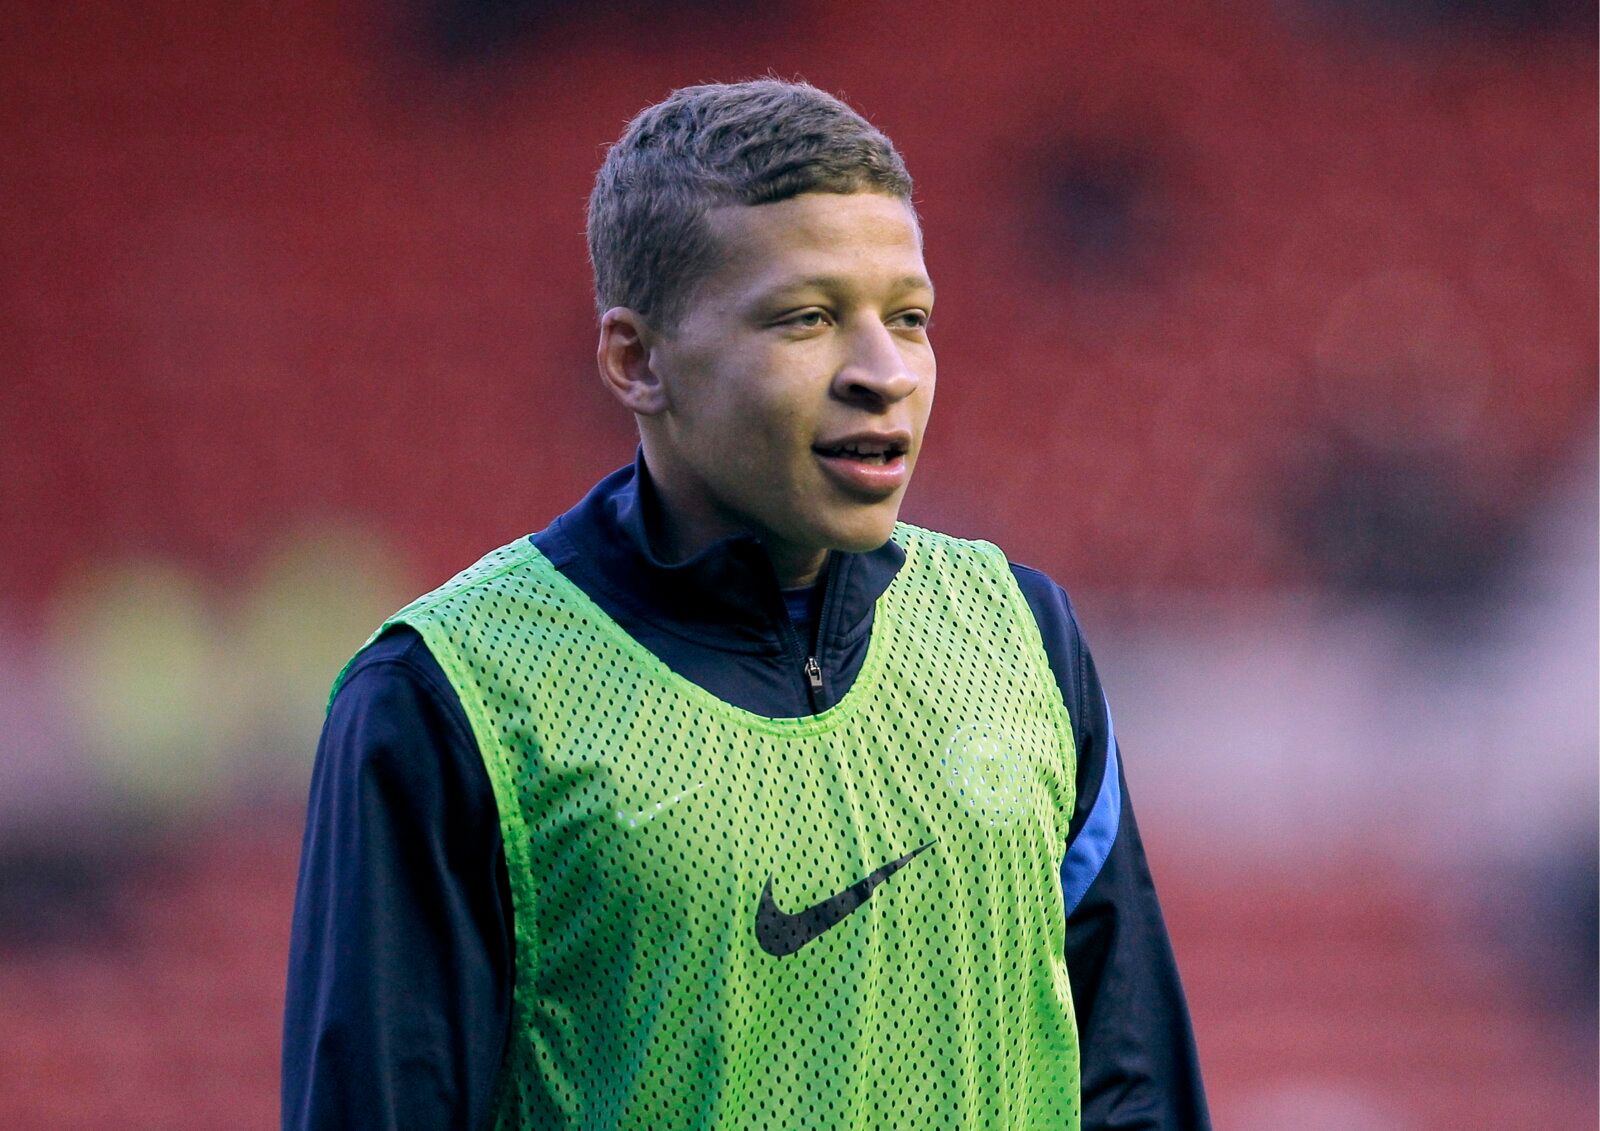 Football - Middlesbrough v Peterborough United - npower Football League Championship - The Riverside Stadium  - 12/13 - 2/4/13 
Peterborough United's Dwight Gayle warms up before the match 
Mandatory Credit: Action Images / Craig Brough 
EDITORIAL USE ONLY. No use with unauthorized audio, video, data, fixture lists, club/league logos or live services. Online in-match use limited to 45 images, no video emulation. No use in betting, games or single club/league/player publications.  Please contact 